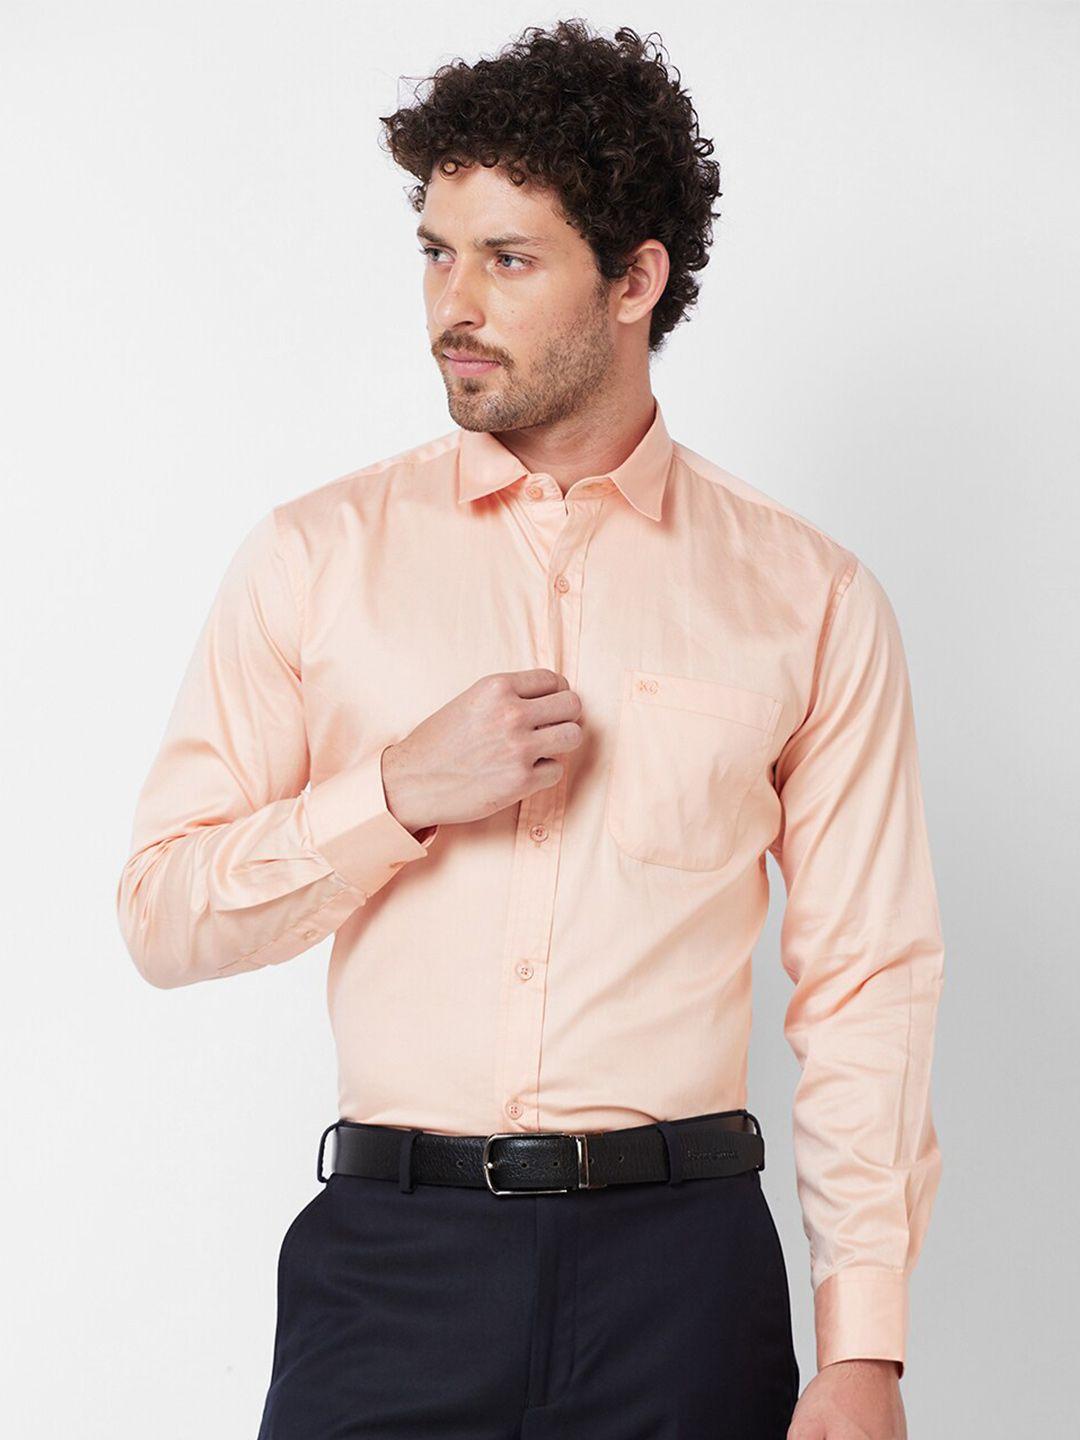 kenneth-cole-cotton-slim-fit-opaque-formal-shirt